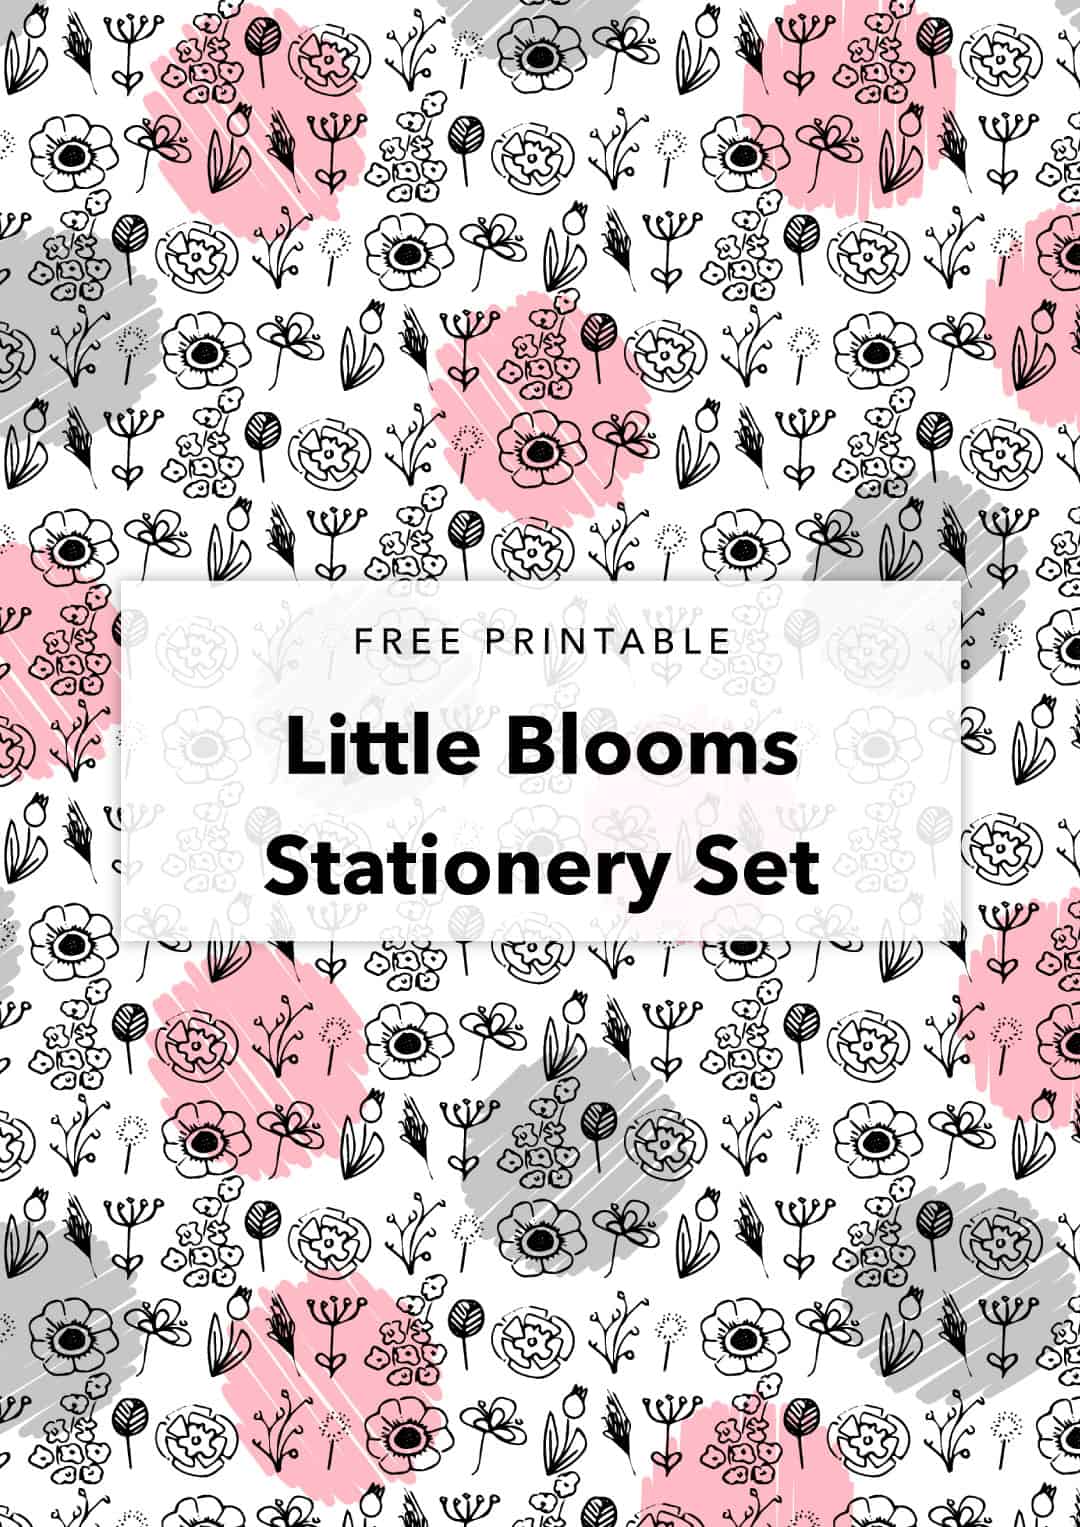 free printable little blooms stationery set